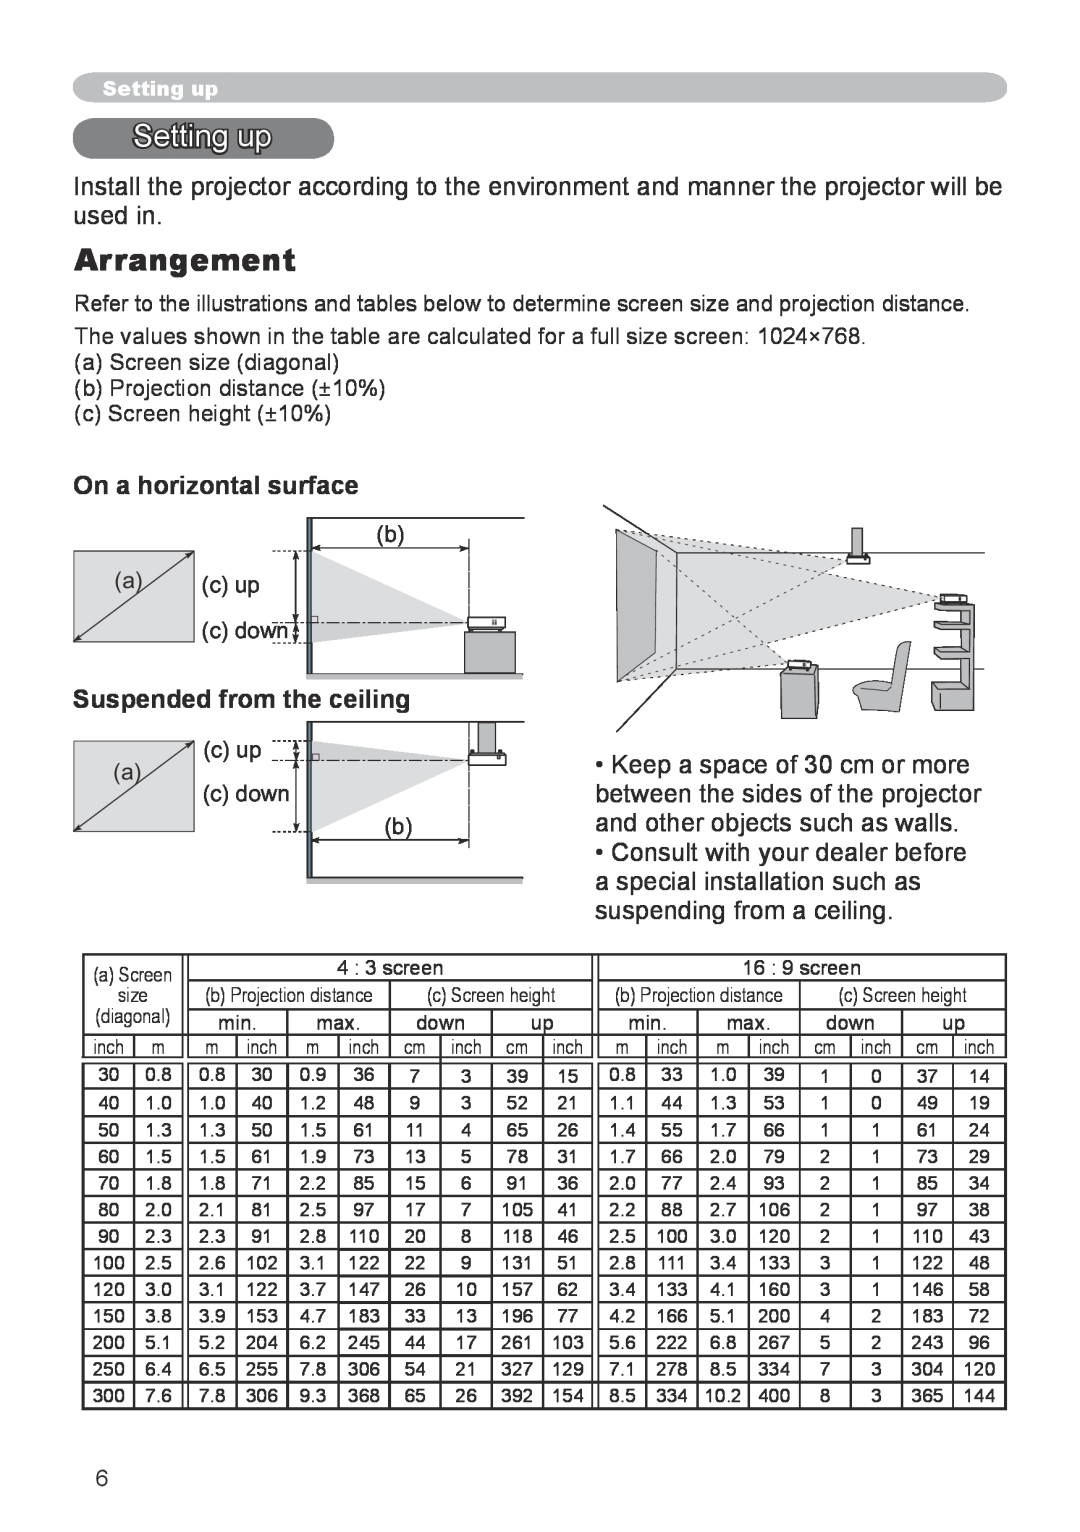 Apple CPX5, CPX1 user manual Setting up, Arrangement, On a horizontal surface, Suspended from the ceiling 